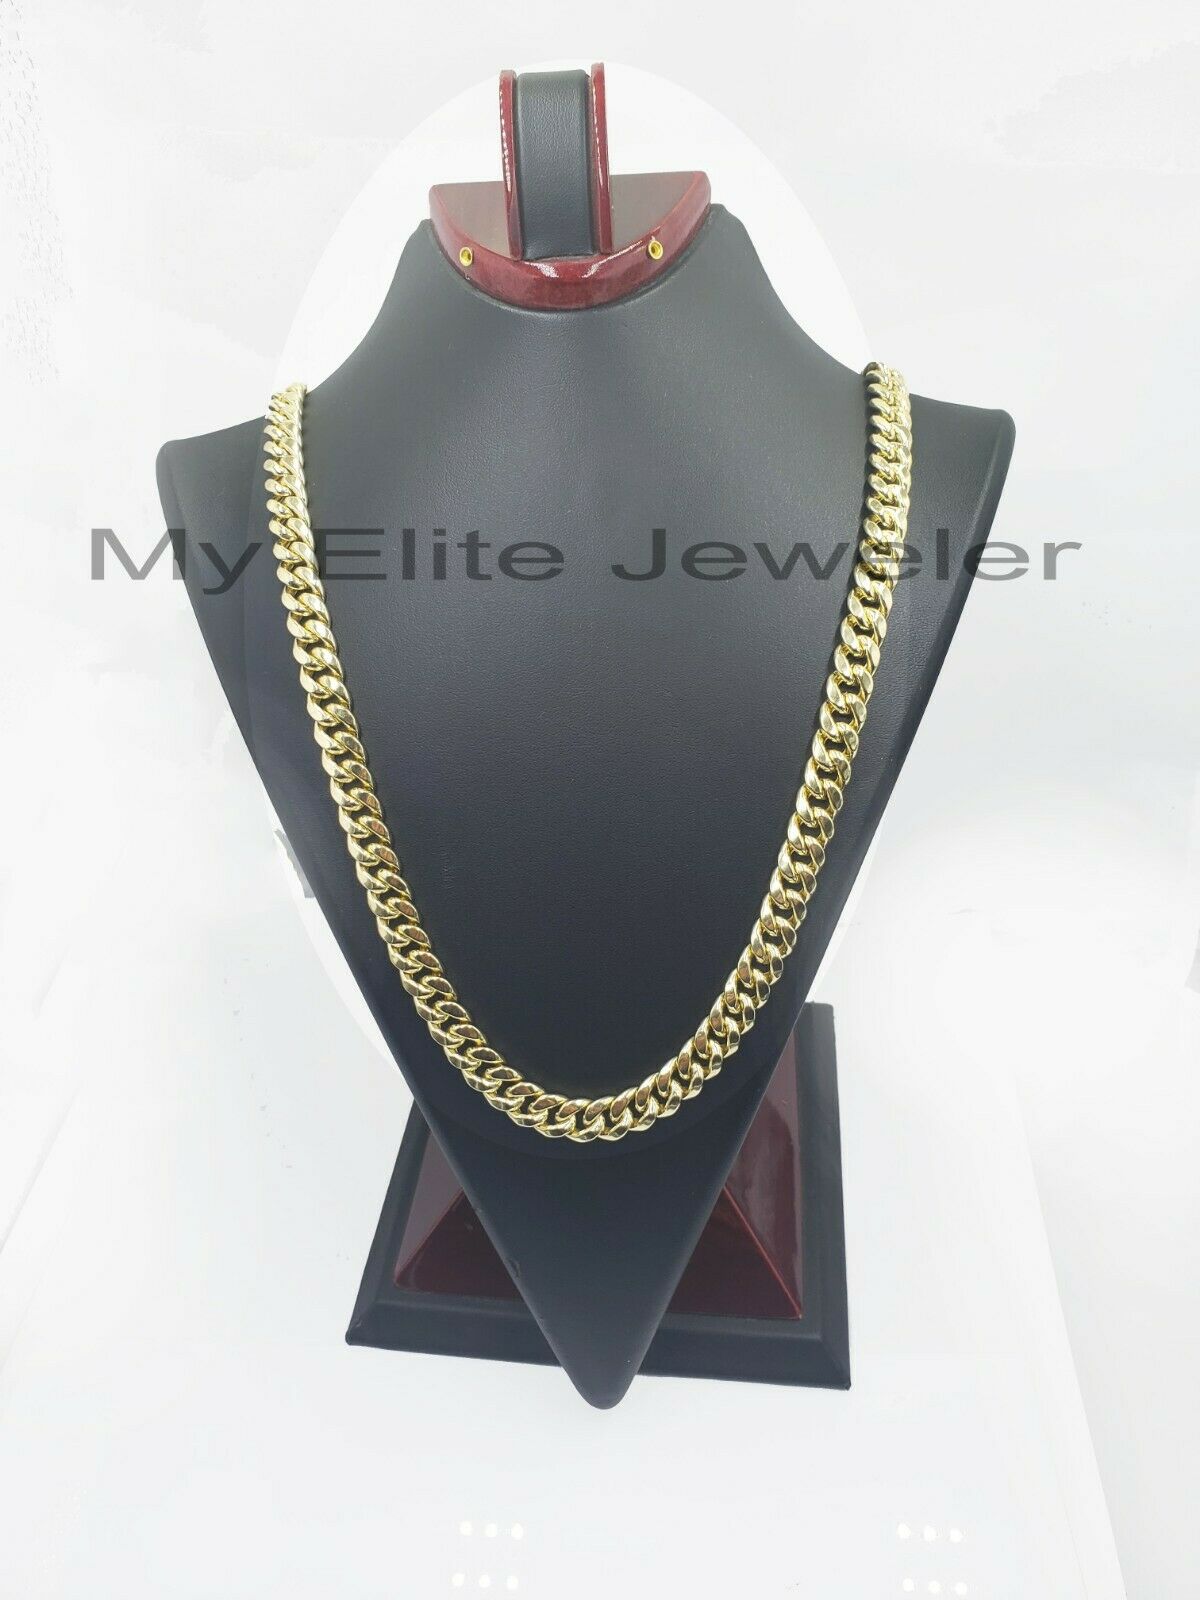 REAL 14k 10mm Mens Chain 24" Miami Cuban Link Necklace Box Lock 14KT Yellow Gold